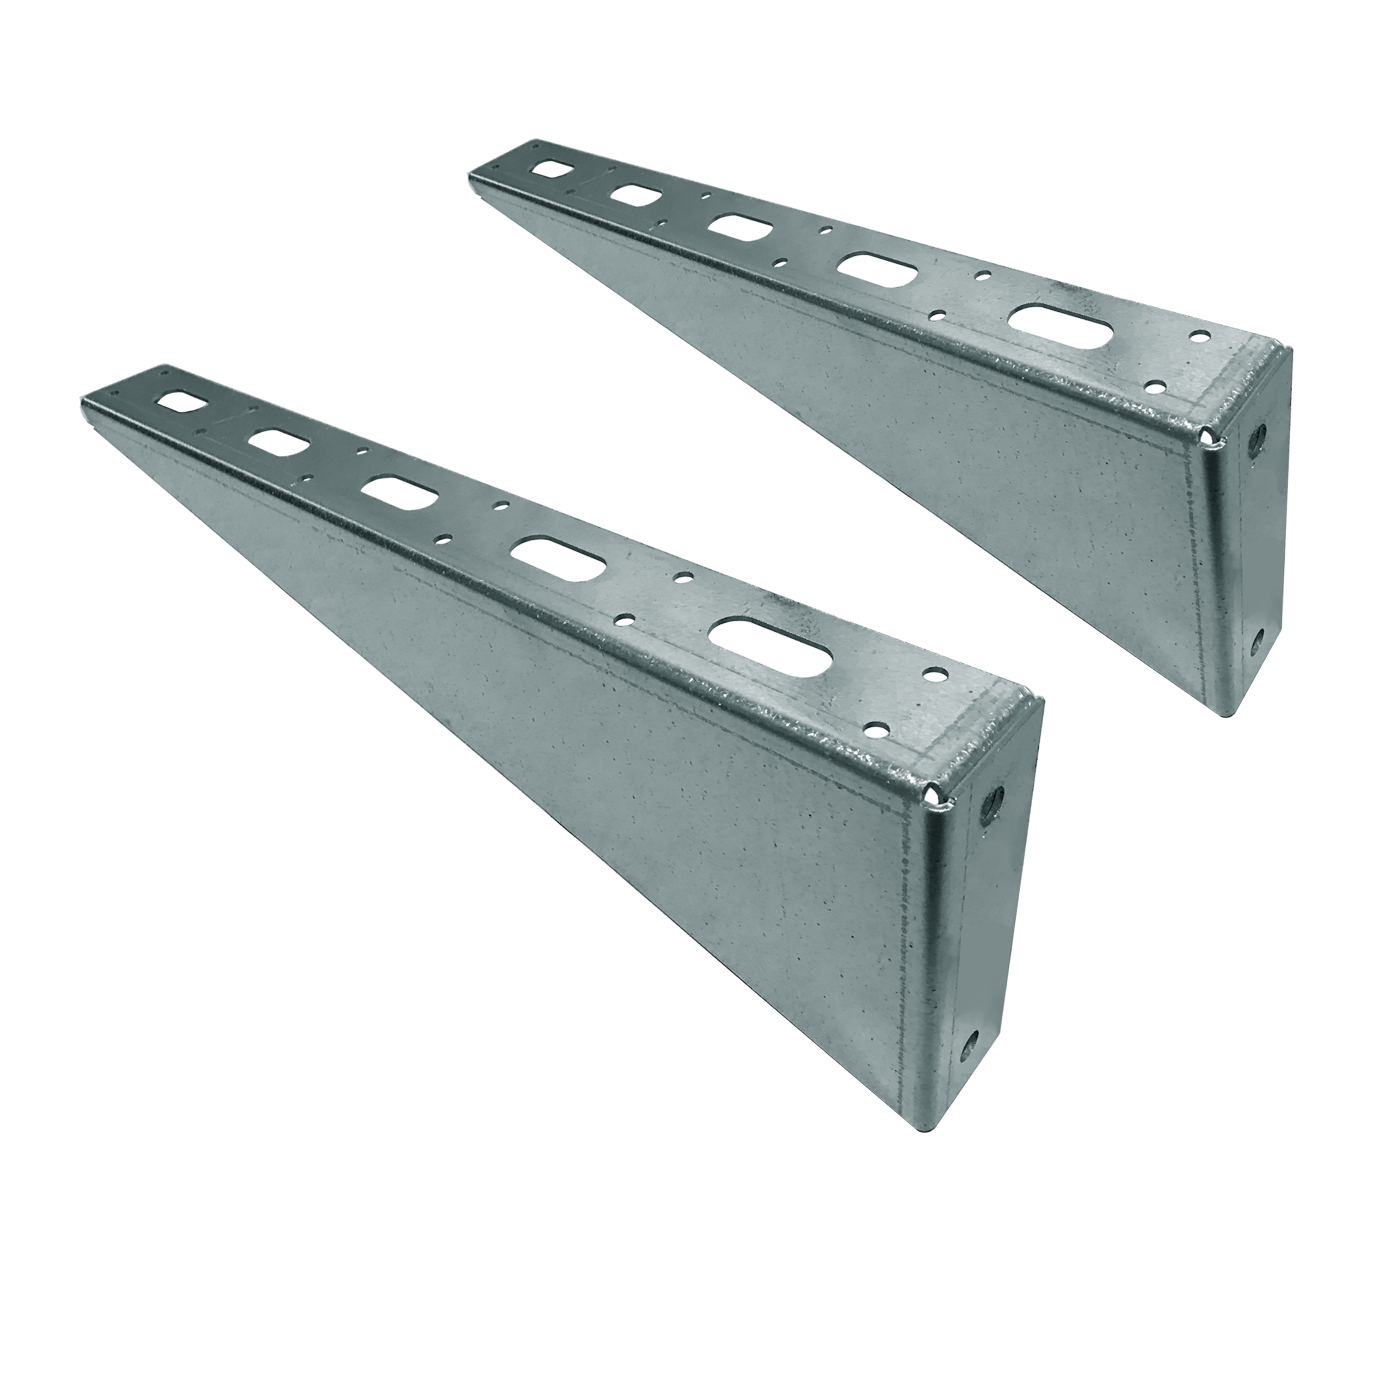 18″ Galvanized Bolt-On Shelving Brackets for Shipping Containers (2 Pack)